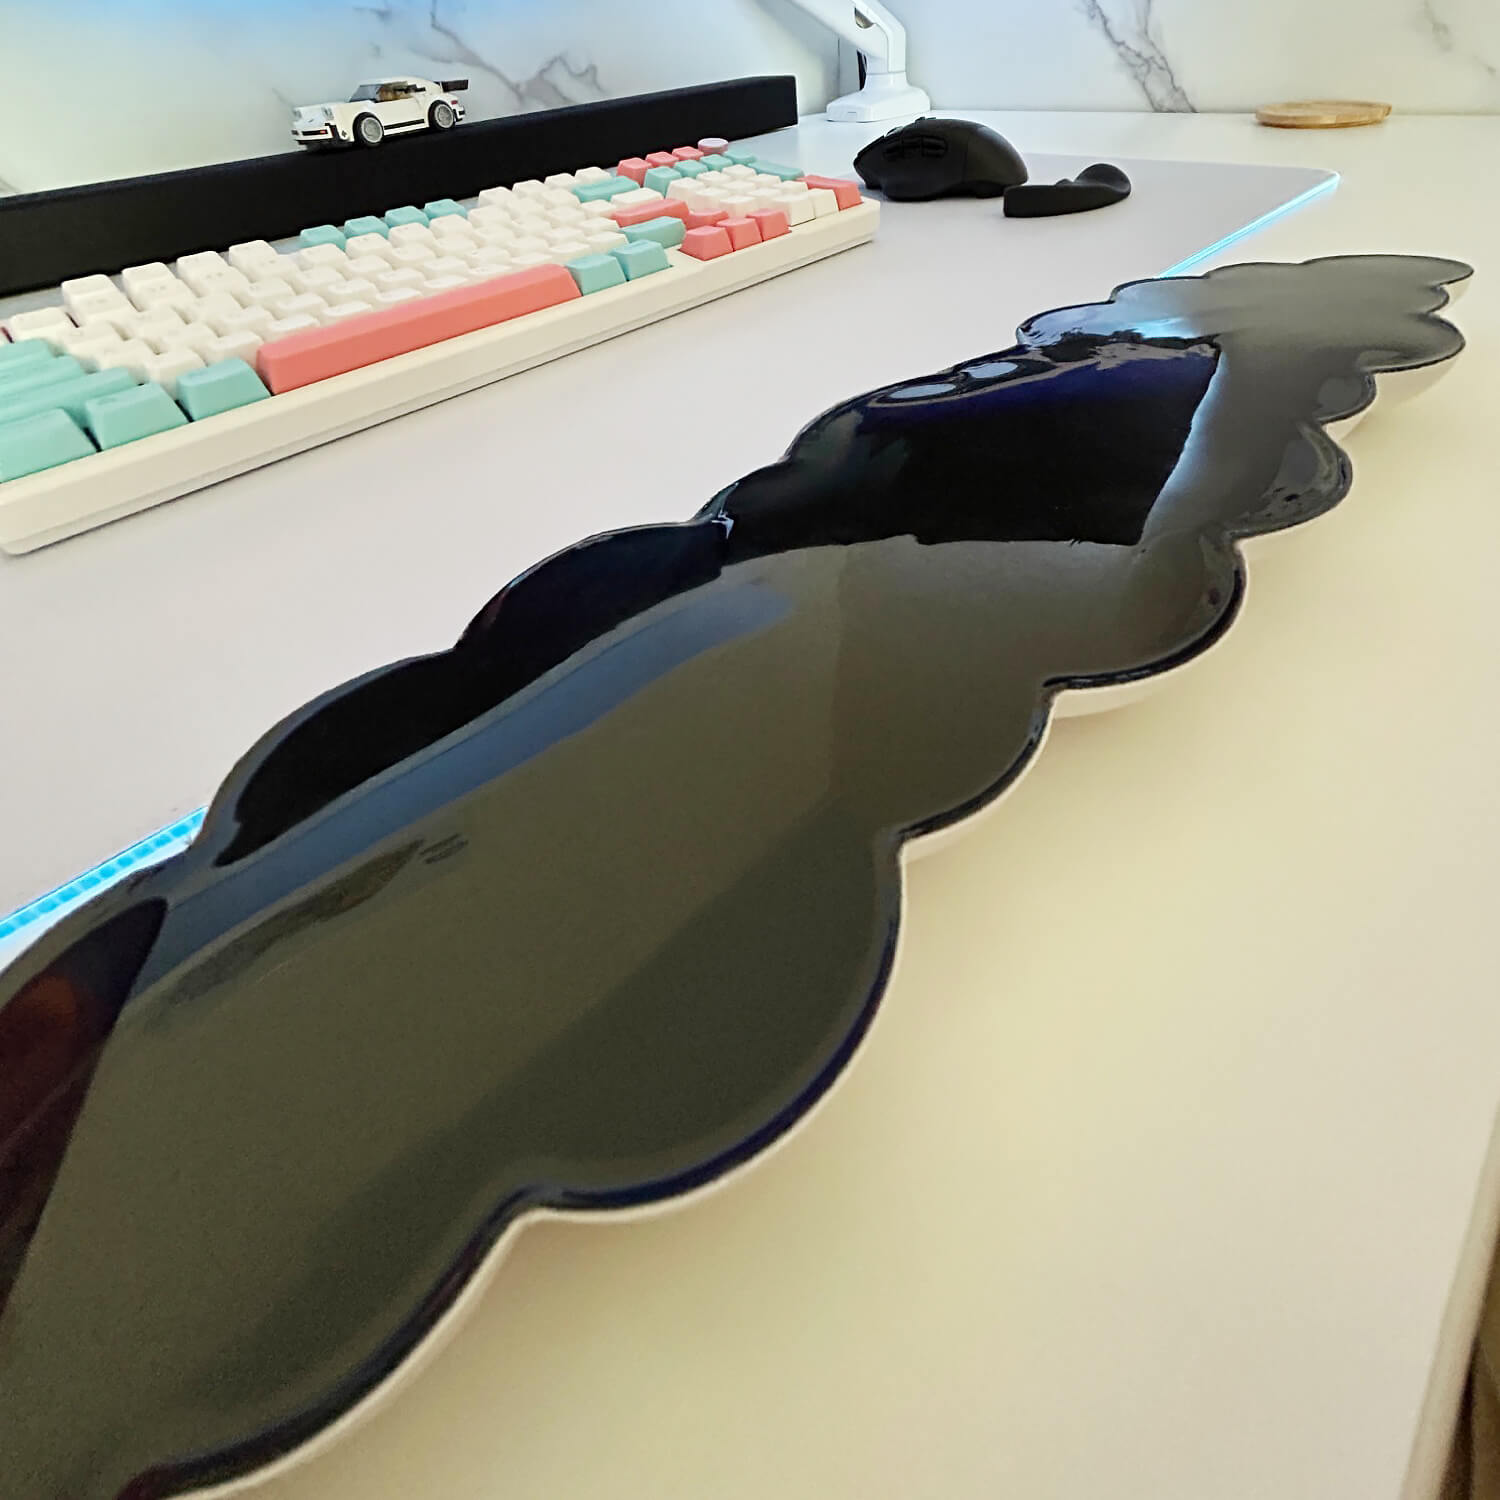 ergonomic cloud shaped keyboard and mouse wrist rest pad roomtery